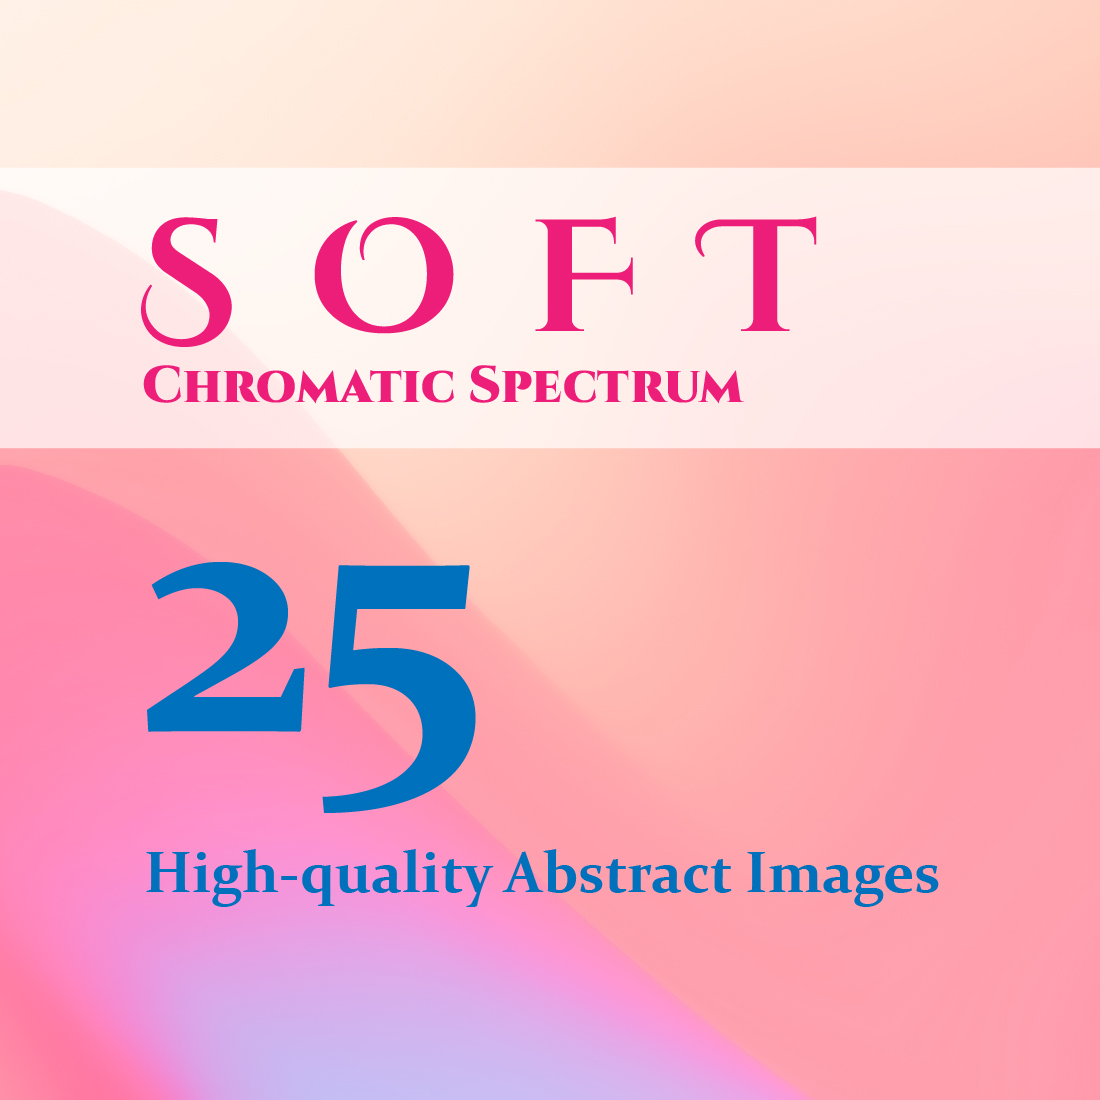 Chromatic Spectrum - Abstract Images with Colorful Gradient Backgrounds cover image.